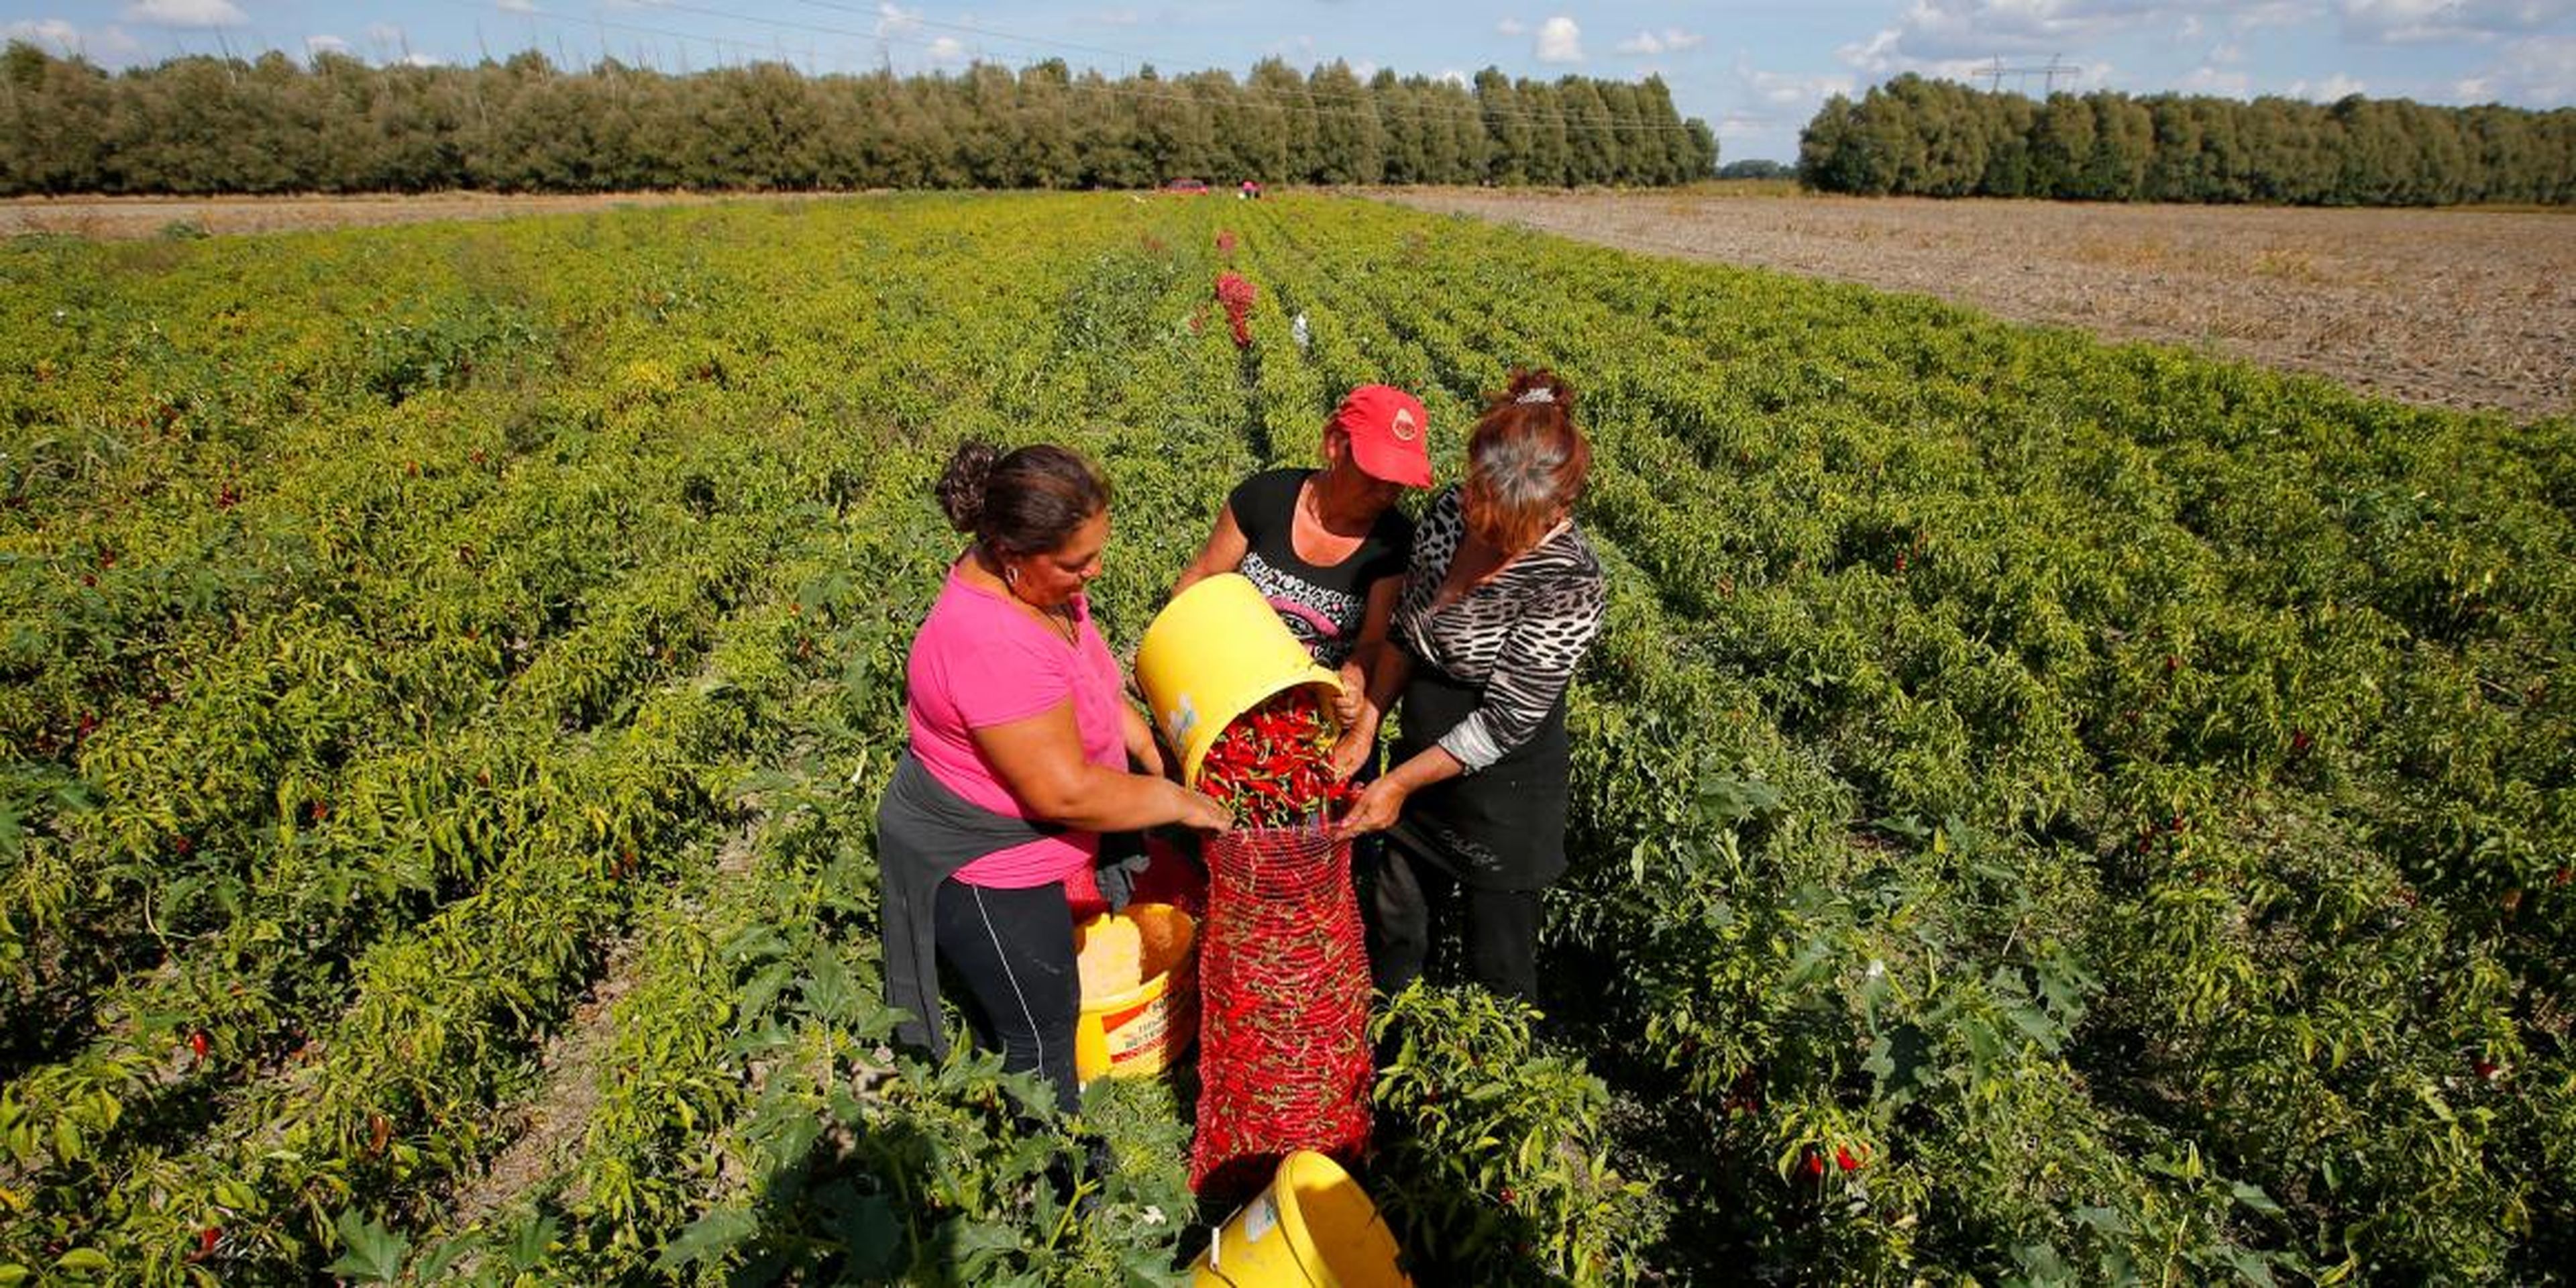 Women load red peppers into a sack in a field for a company producing powdered paprika, one of Hungary's best-known staples, in Batya, Hungary, September 26, 2016.